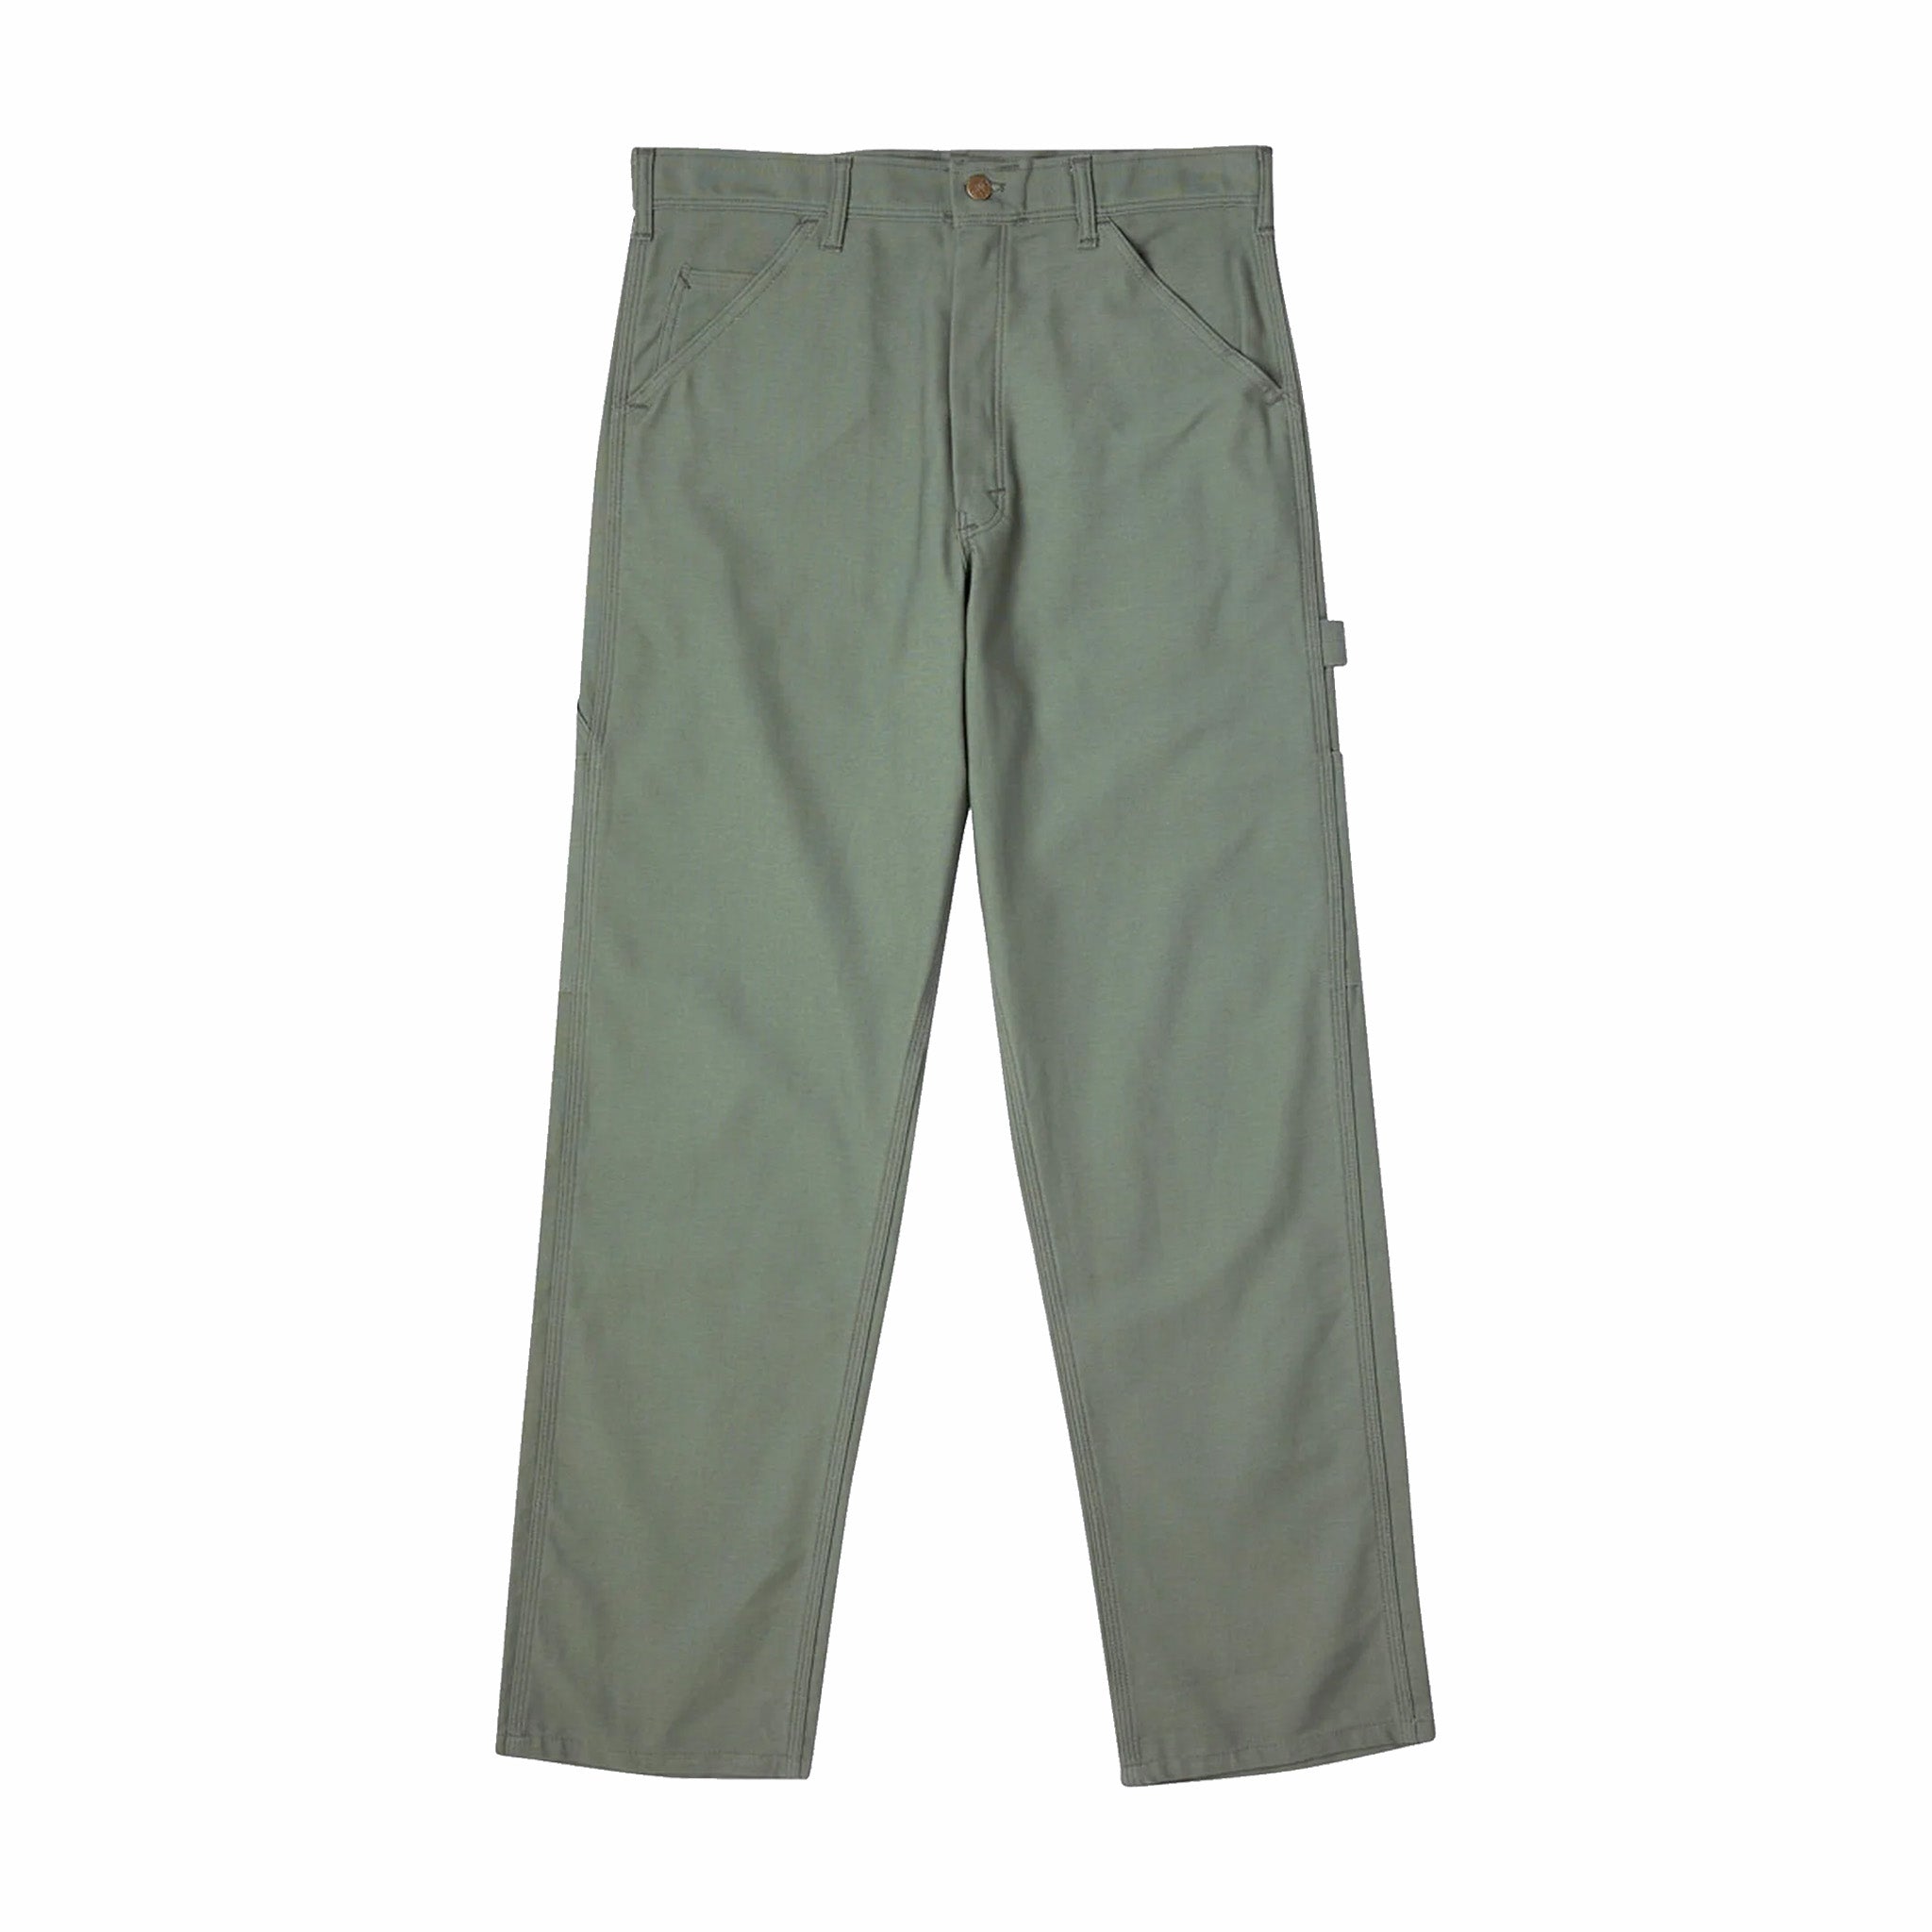 Stan Ray Original Painter Pant 3501 (Olive Sateen) - August Shop